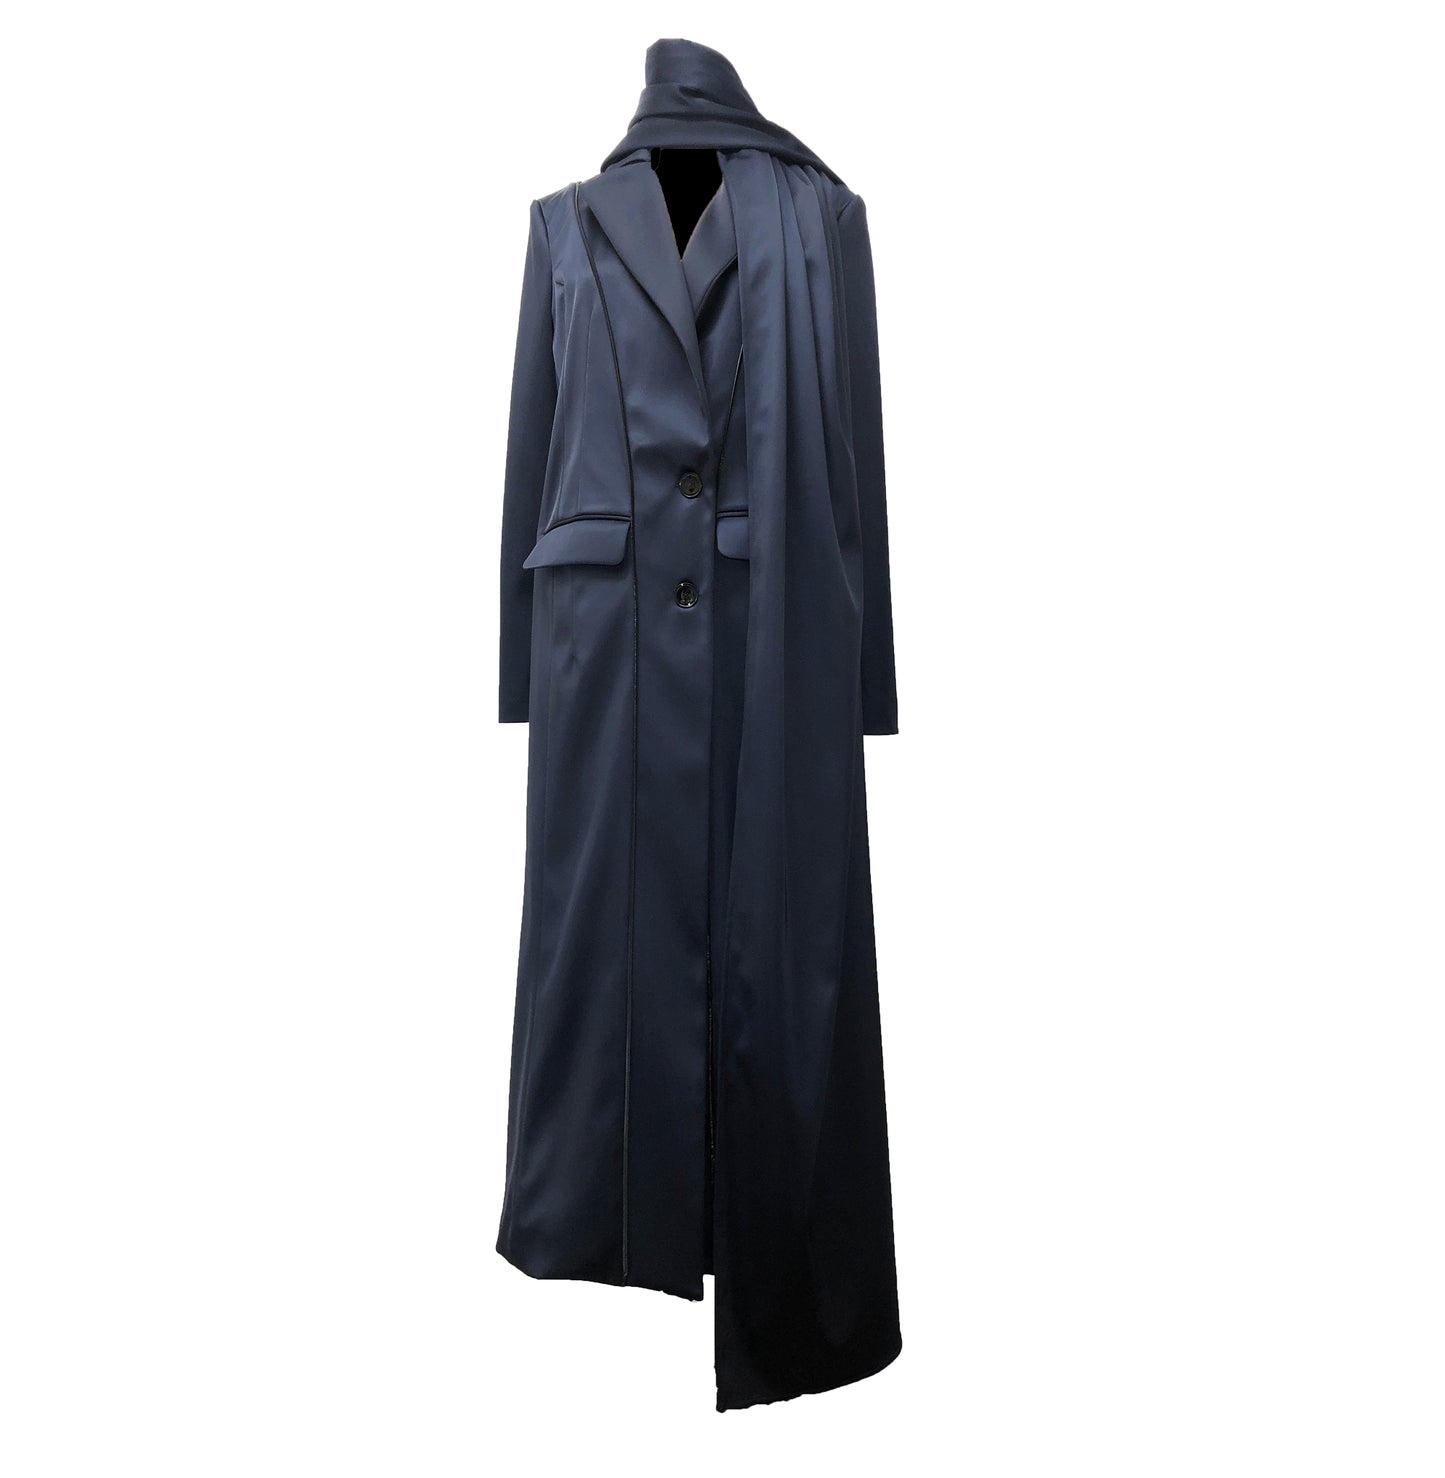 Navy stretch satin coat with transformable zippers and self tie belt with draped detail around the neck